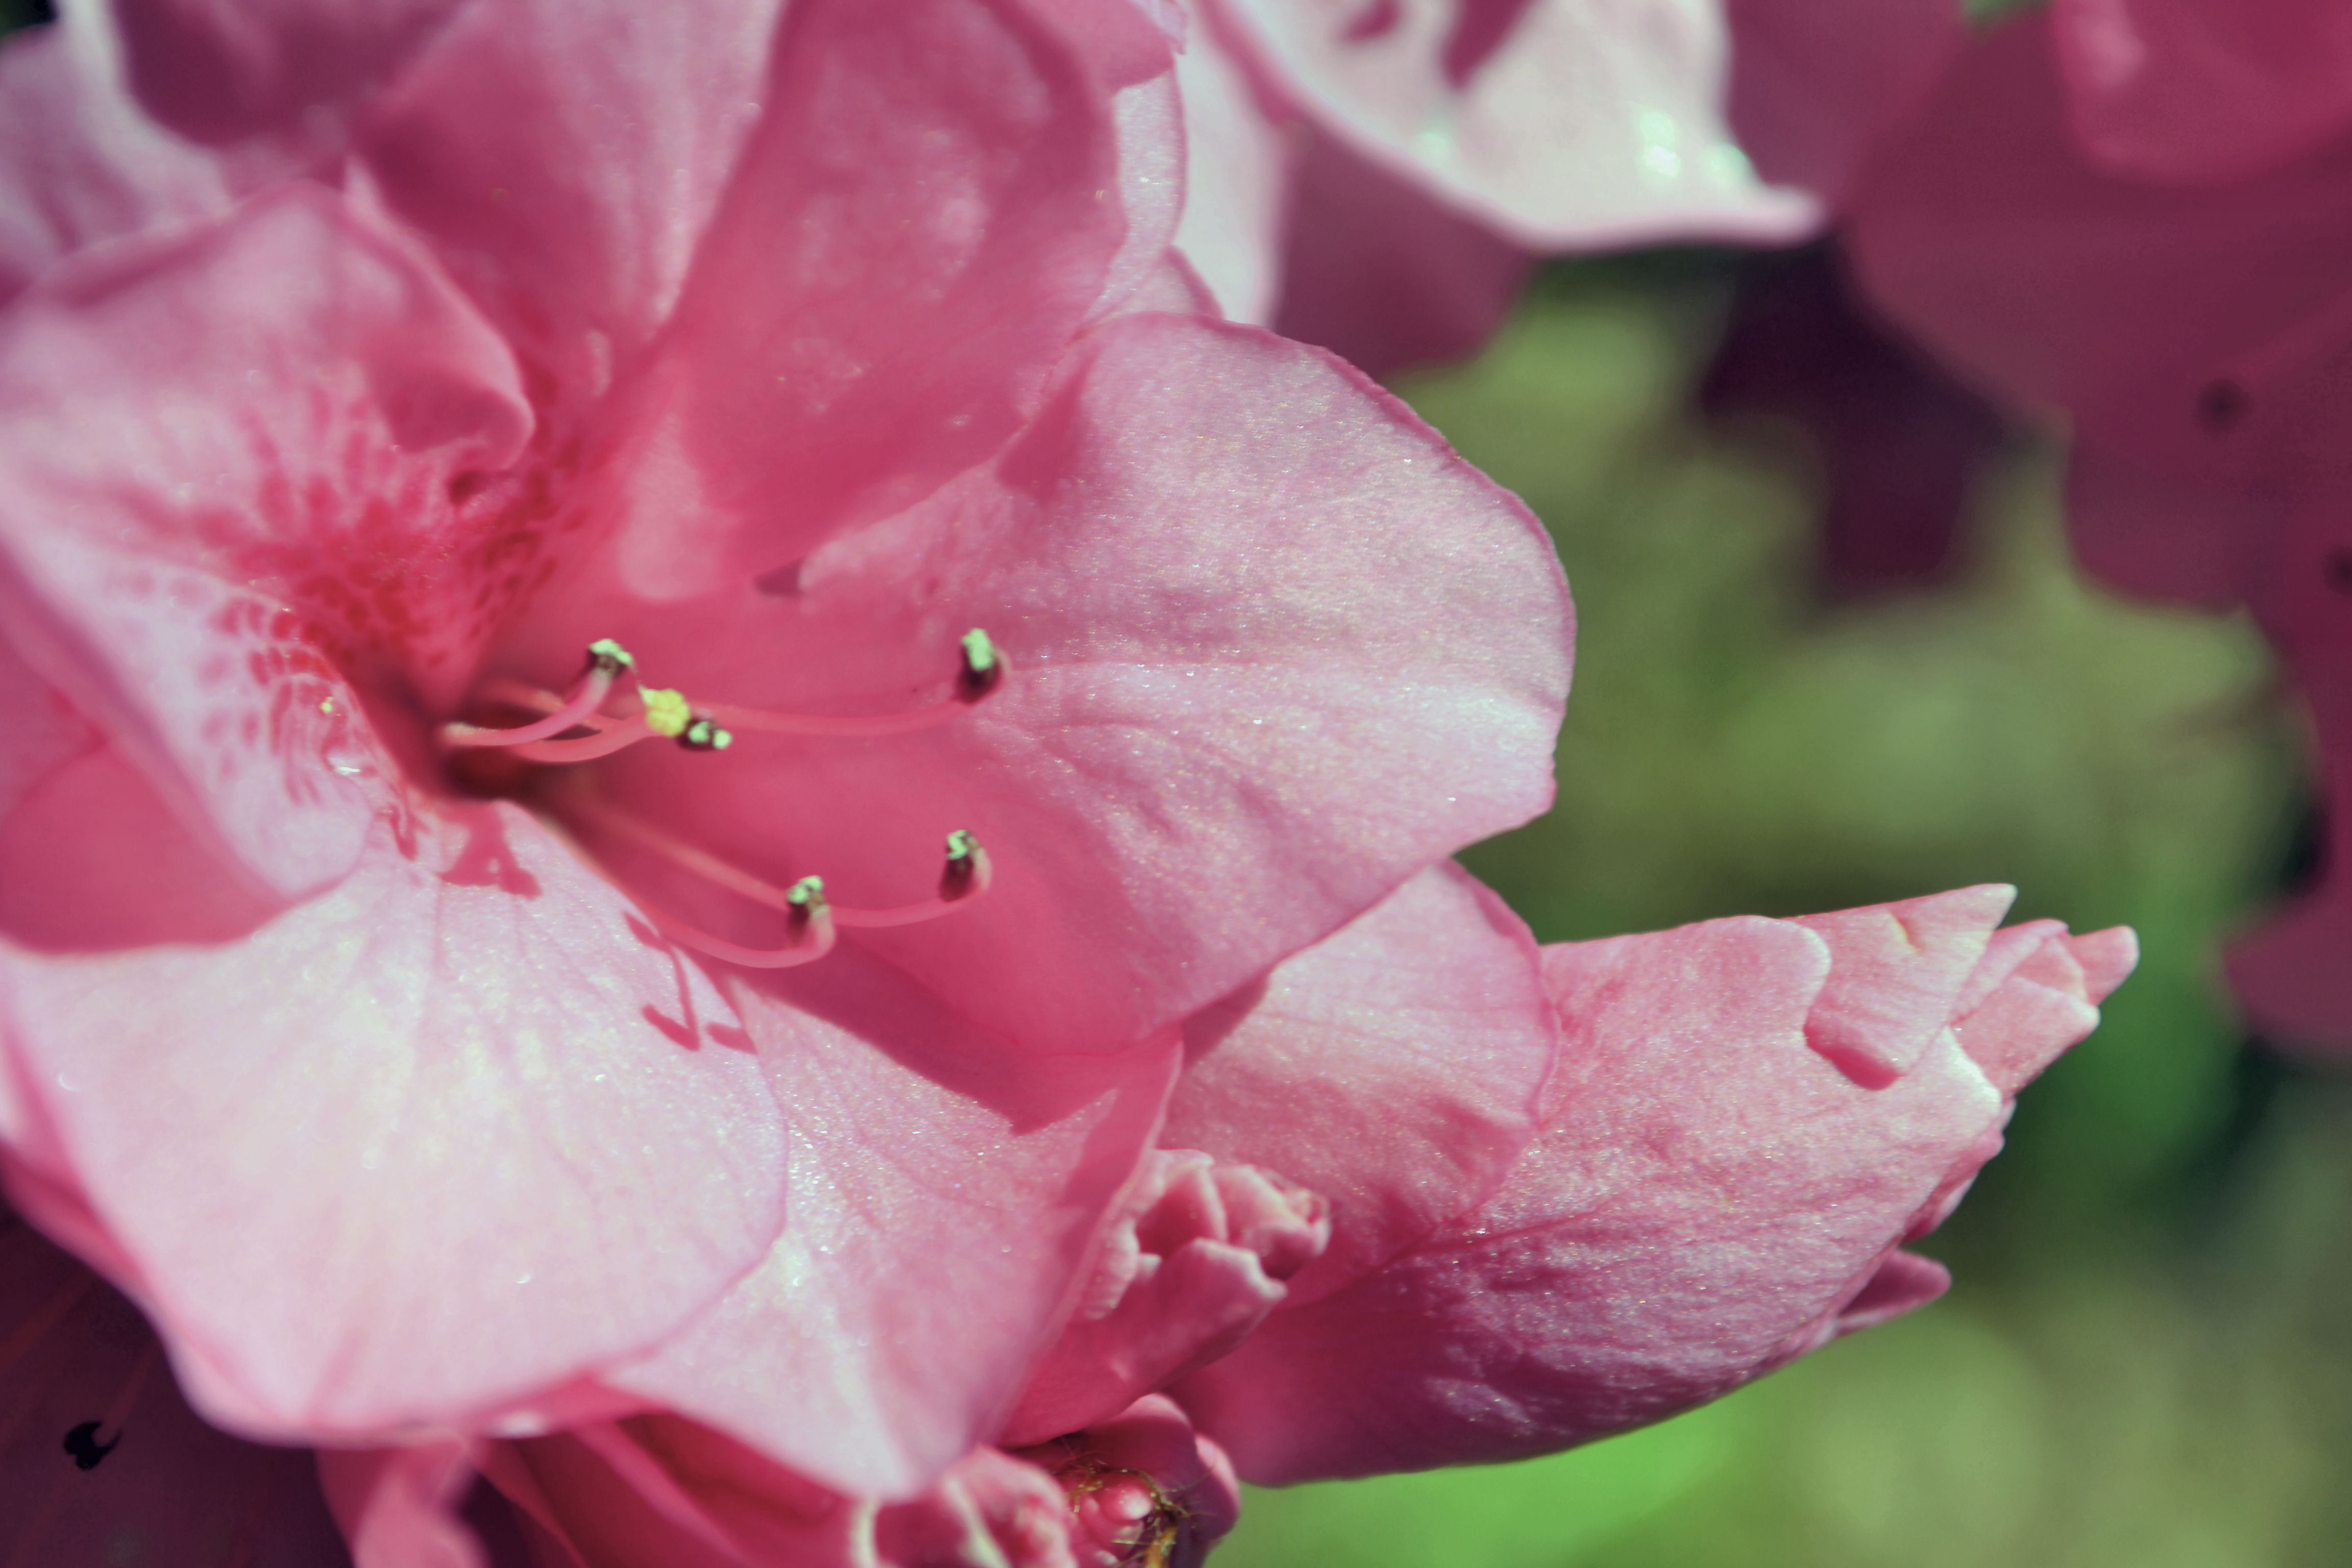 earth, rhododendron, pink flower, flowers